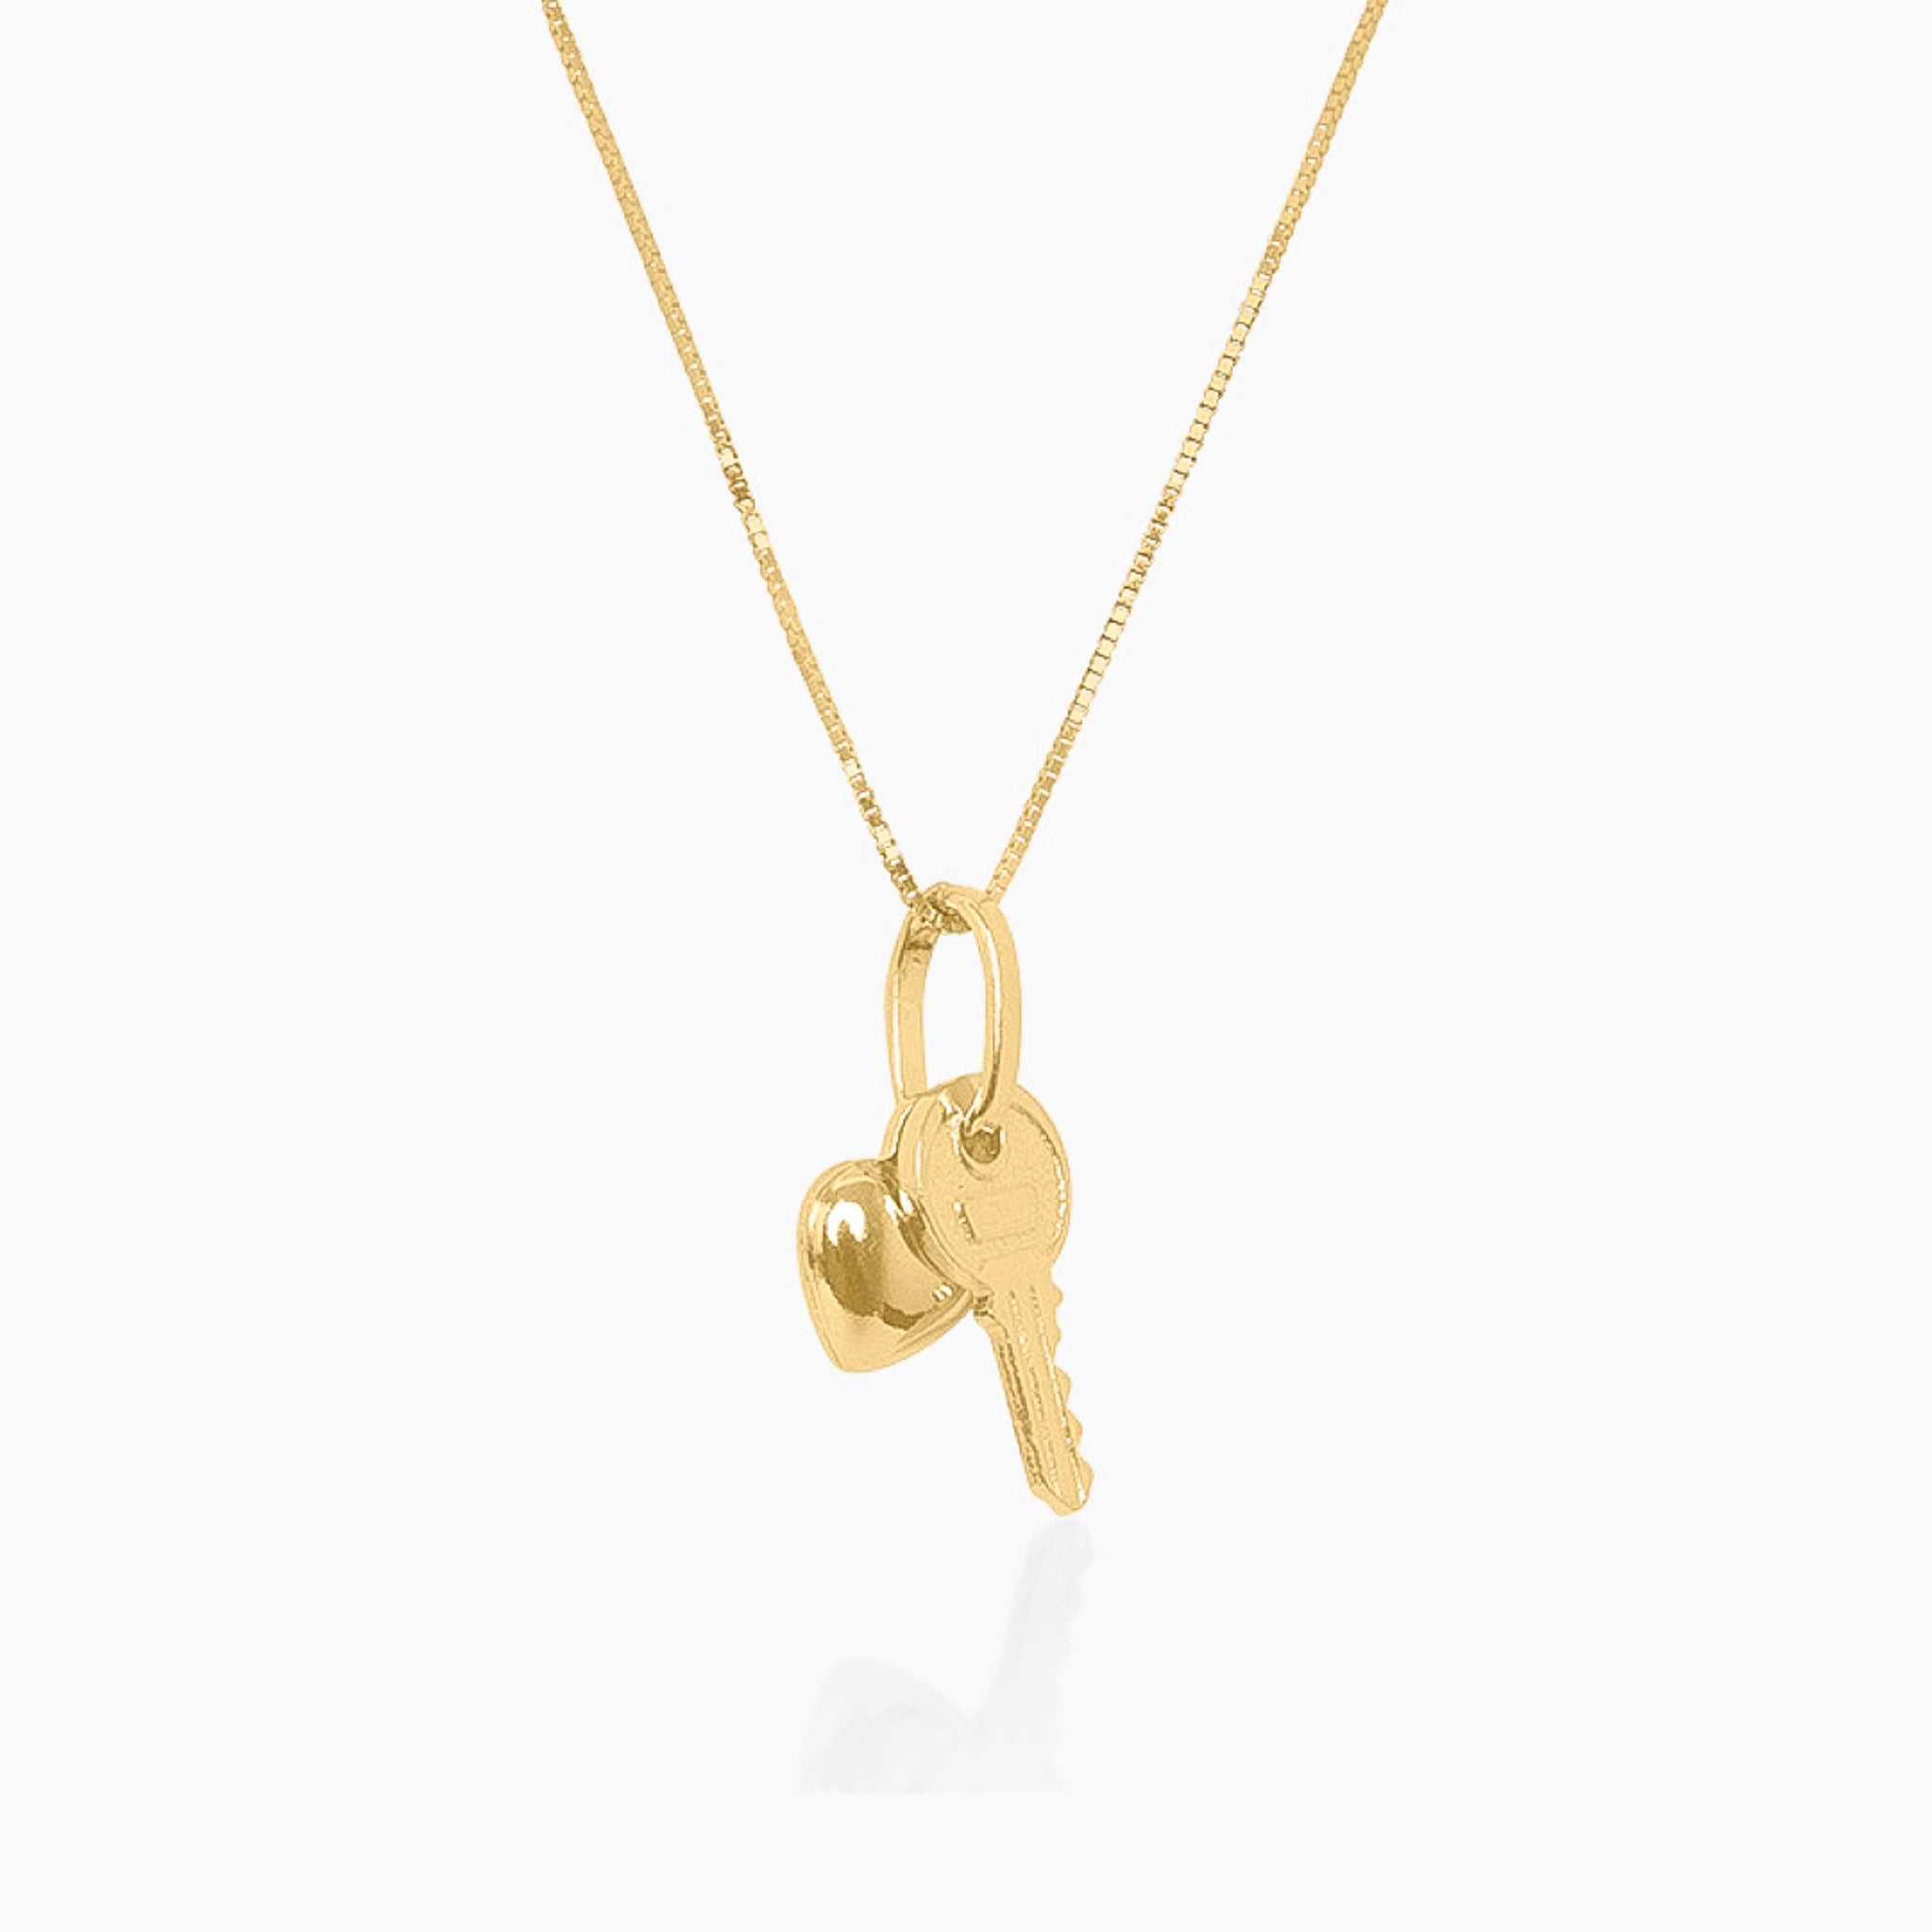 14K YELLOW GOLD HEART AND KEY NECKLACE